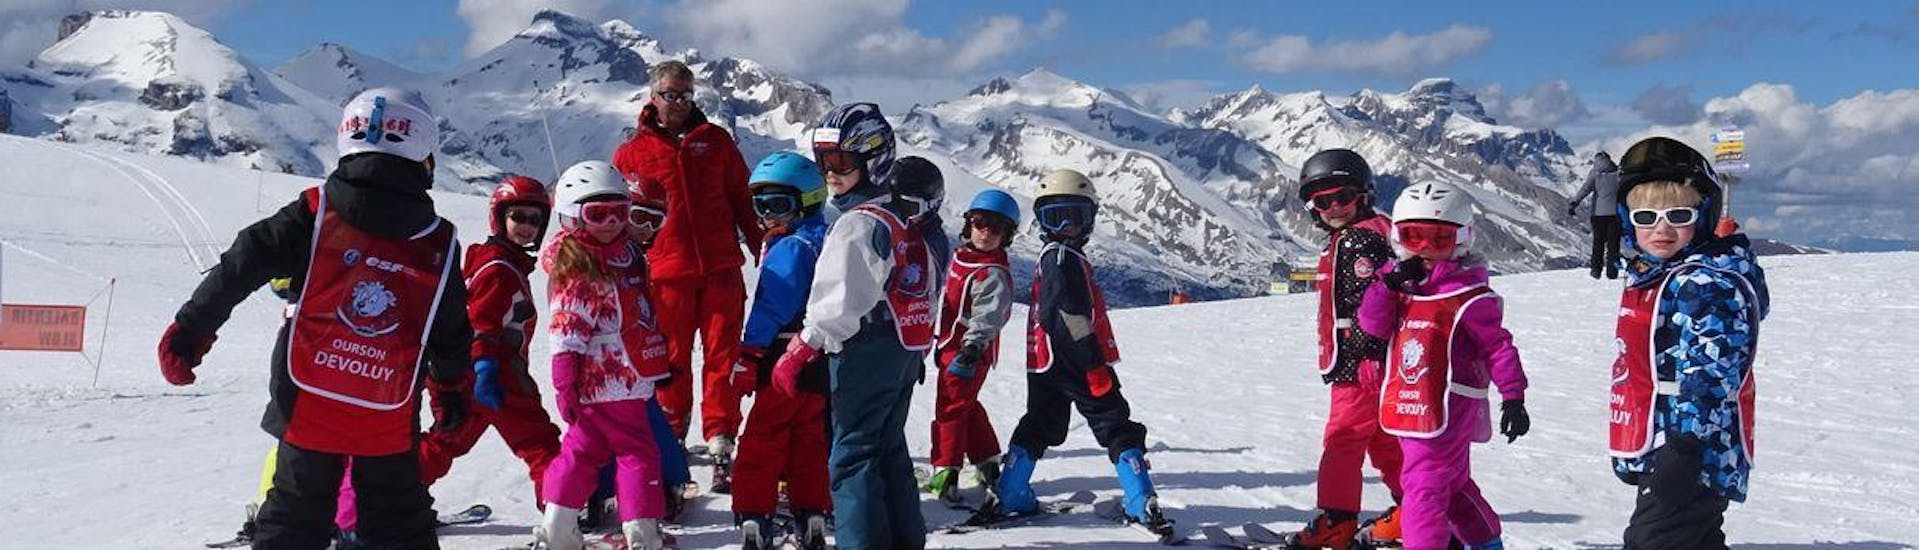 Kids are standing at the top of the slopes ready to start their Kids Ski Lessons (6-12 years) - Beginner with the ski school ESF du Dévoluy.